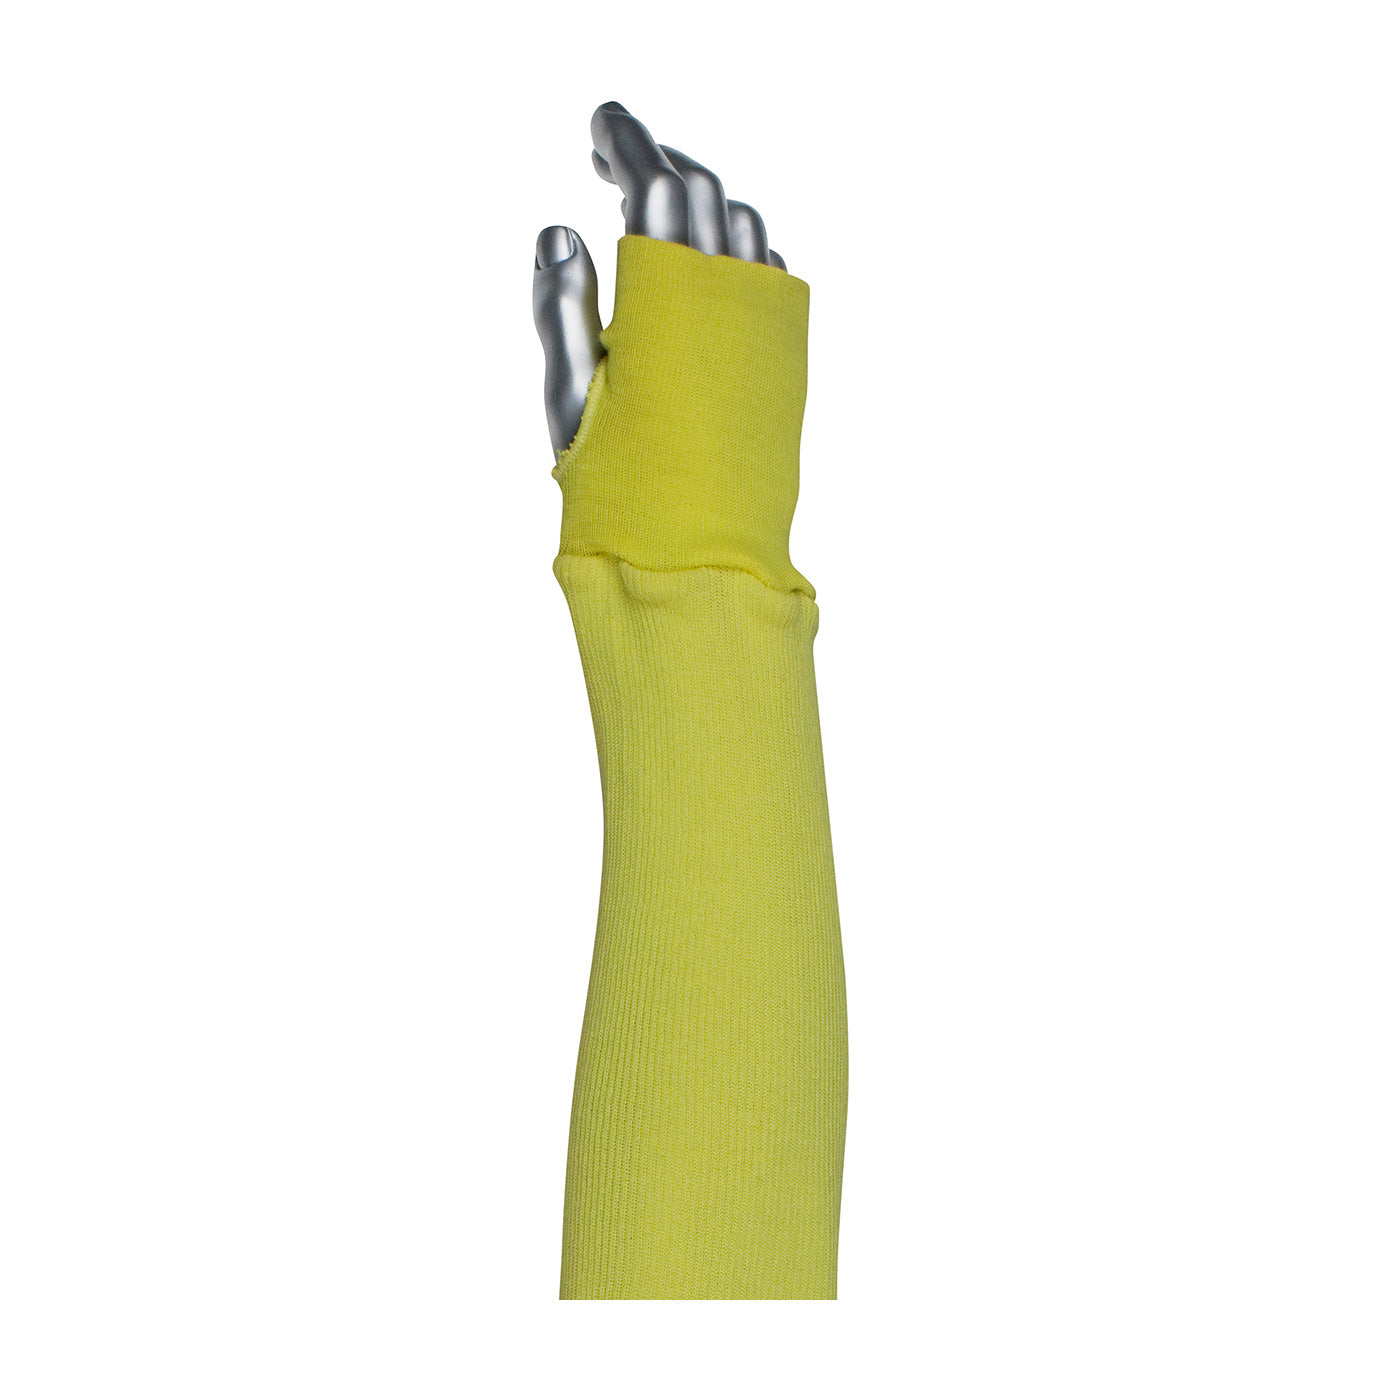 Protective Industrial Products-ACP TECHNOLOGY™ 2-PLY ACP/ KEVLAR® ARC/FR SLEEVE WITH THUMB HOLE-eSafety Supplies, Inc